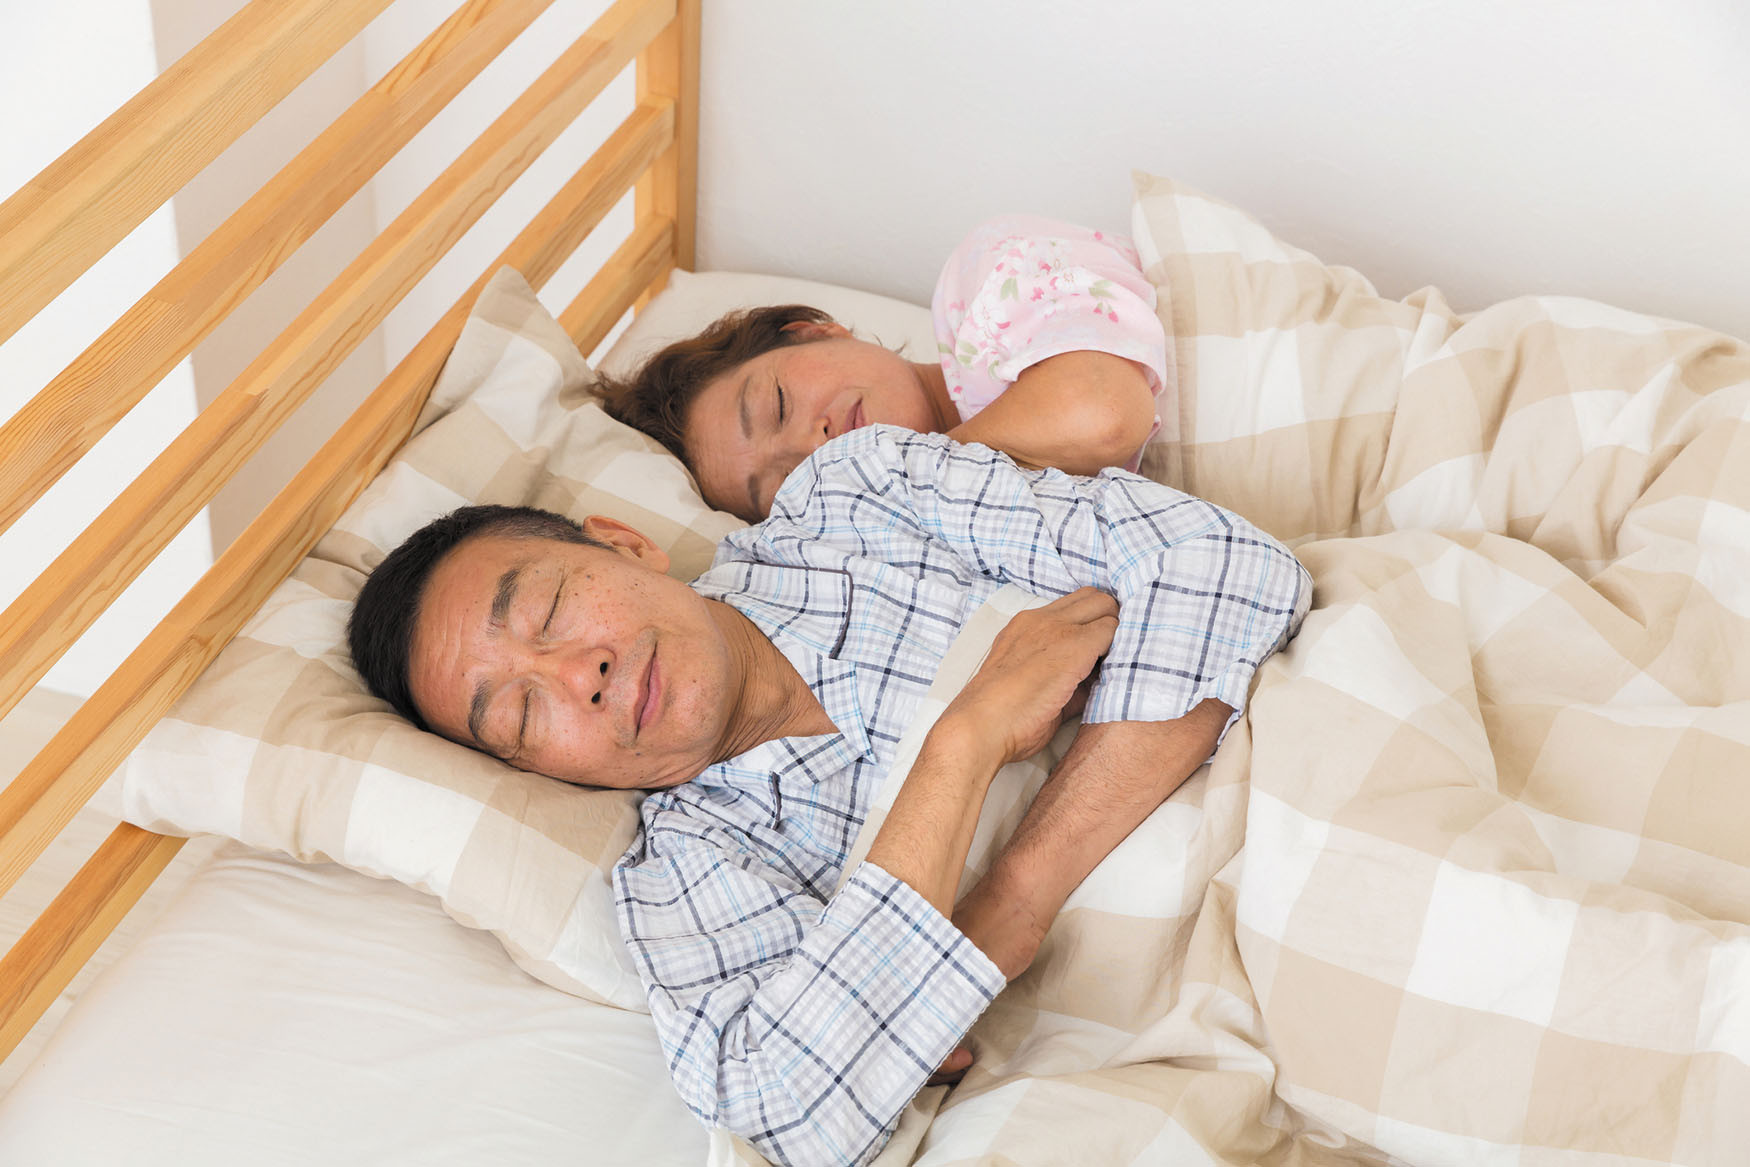 photo of a man and woman sleeping